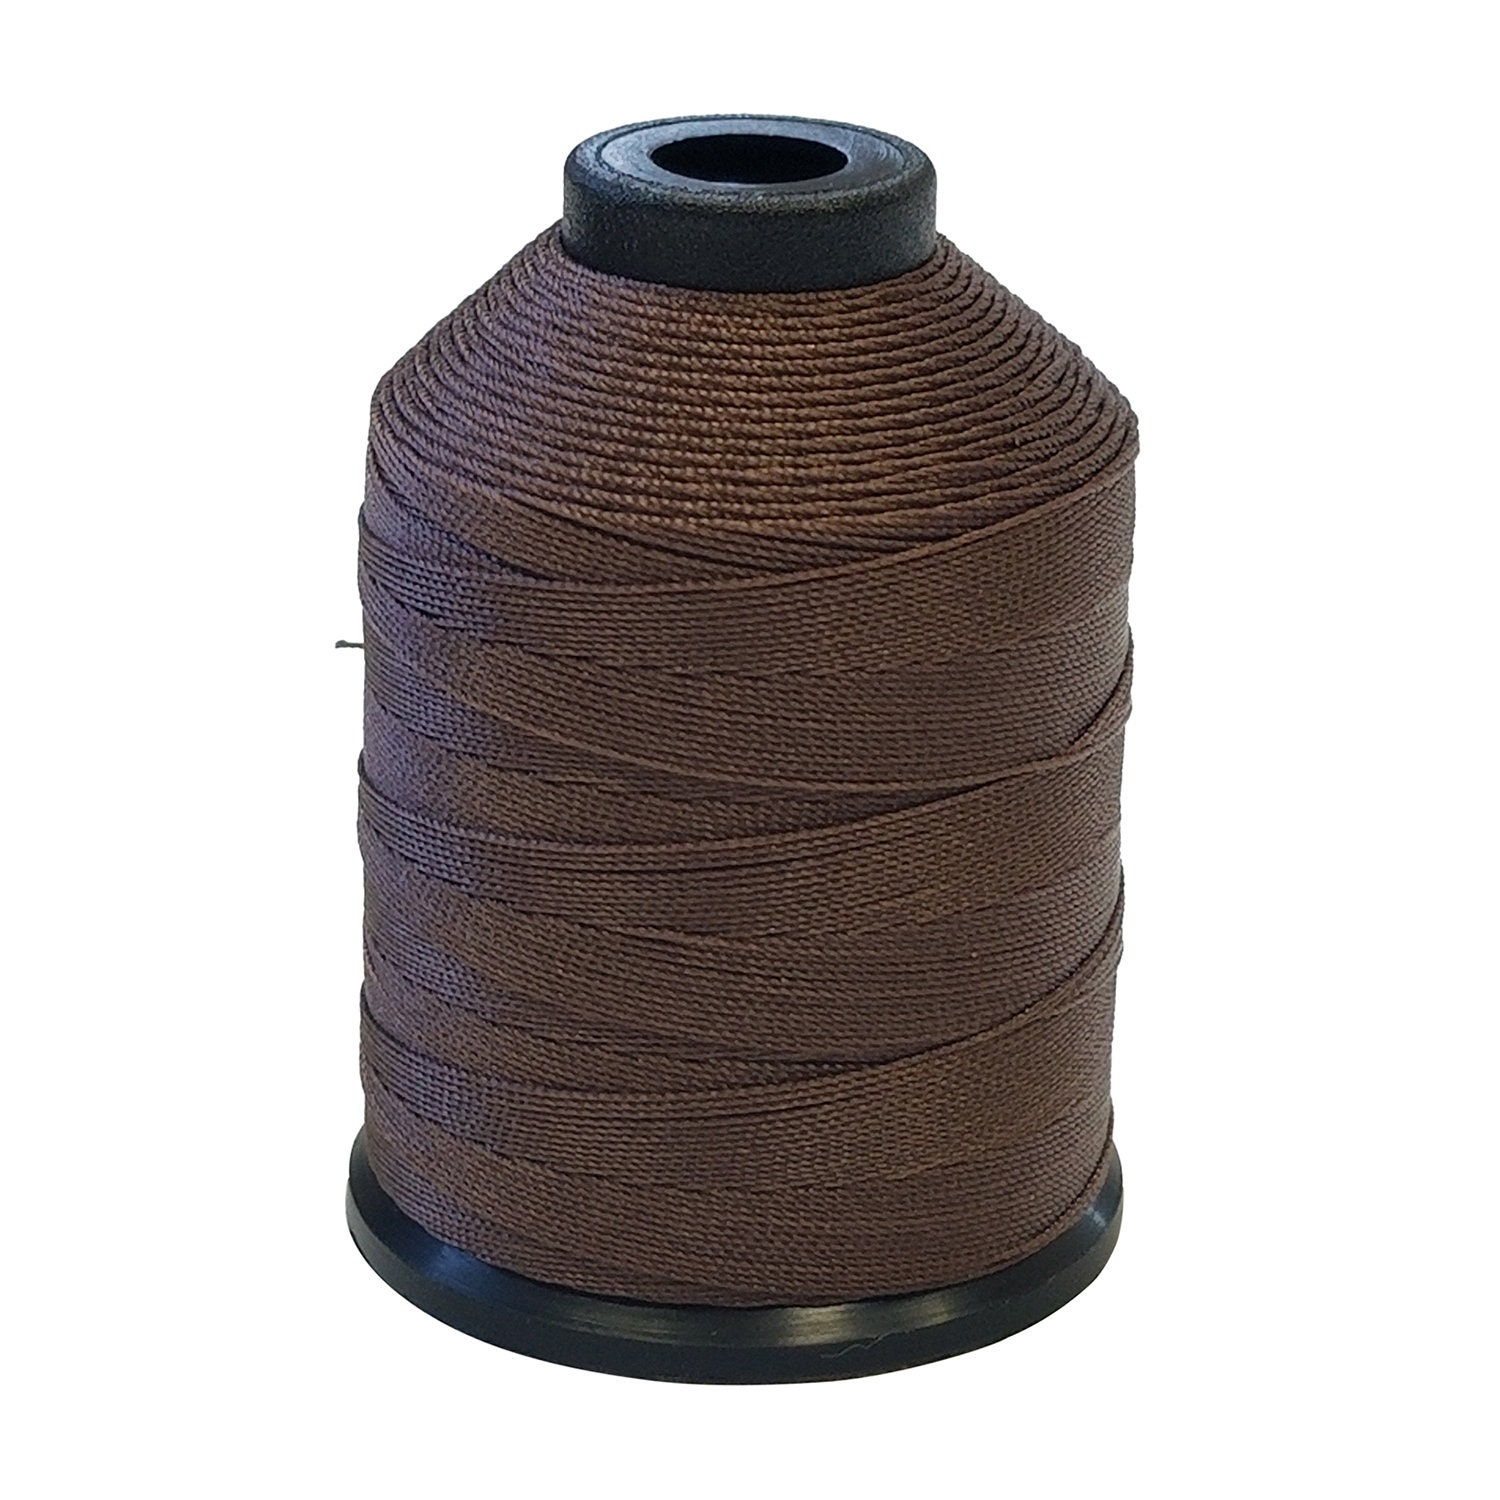 Bonded Nylon Upholstery Sewing Thread Size 69, Tex 70 - 1 Lb. Spool, 6000  Yards-Brown